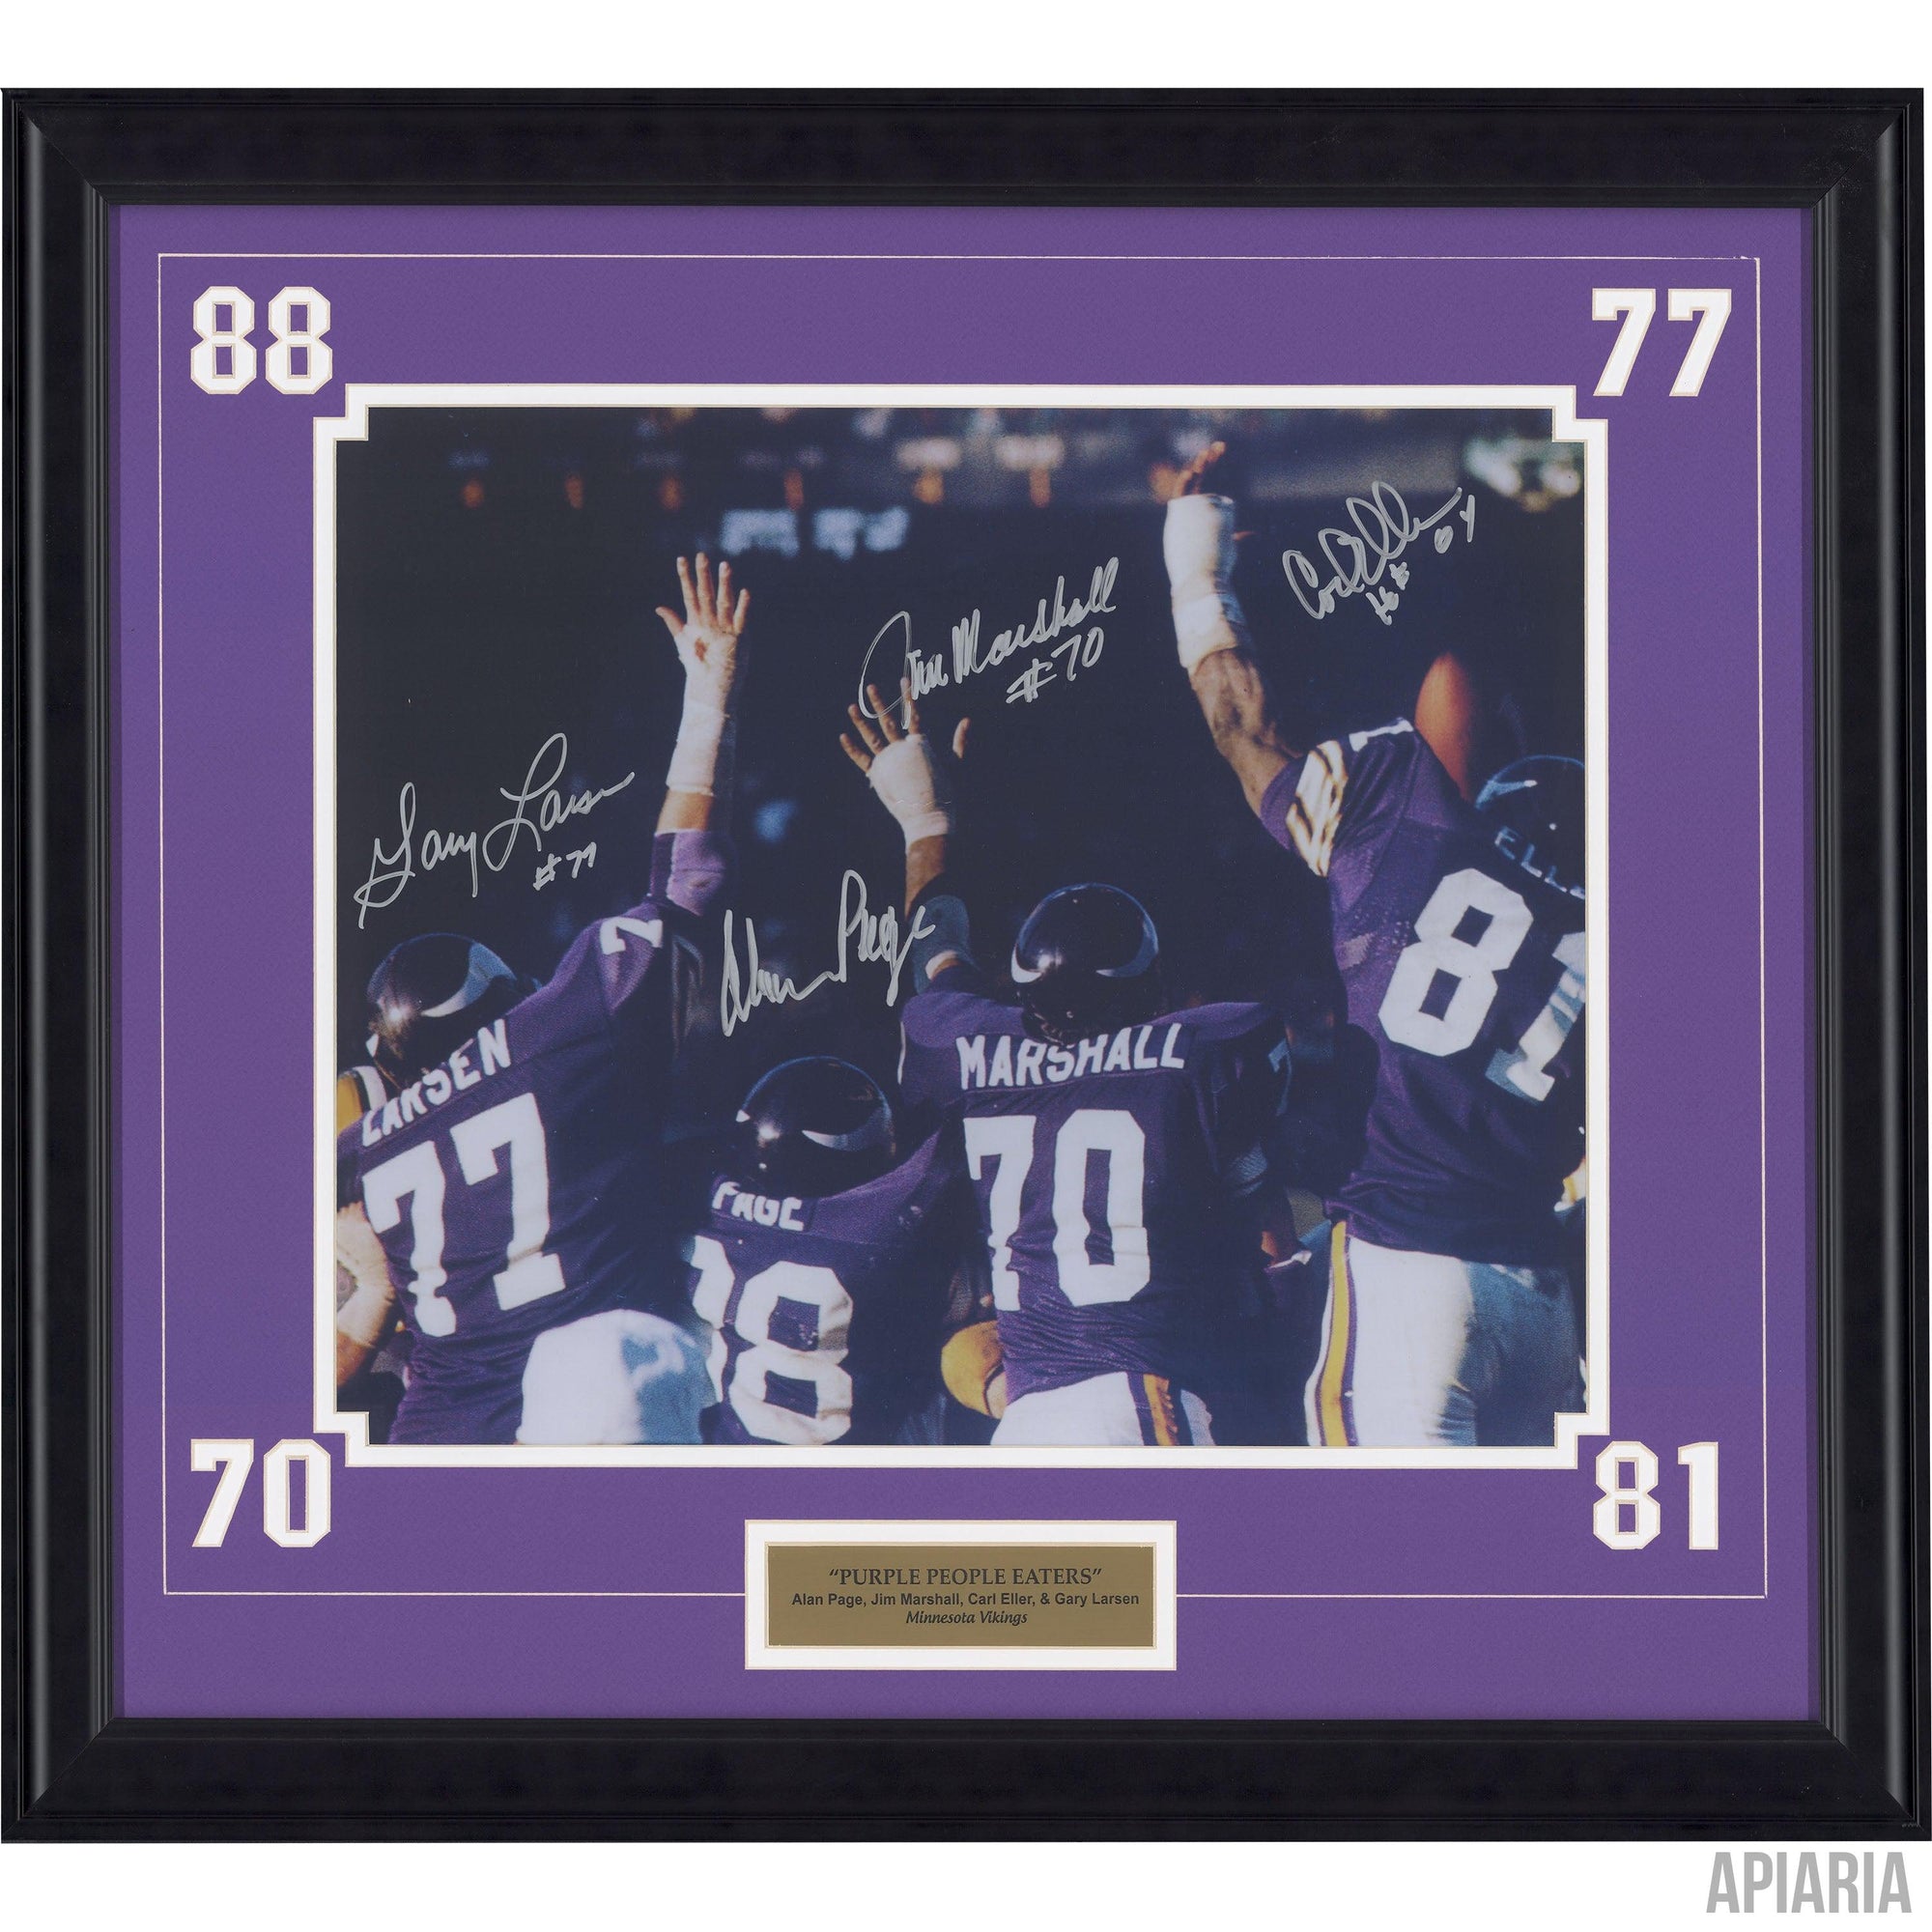 Purple People Eaters: autographed by Alan Page, Carl Eller, Jim Marshall & Gary Larsen-Framed Item-Apiaria